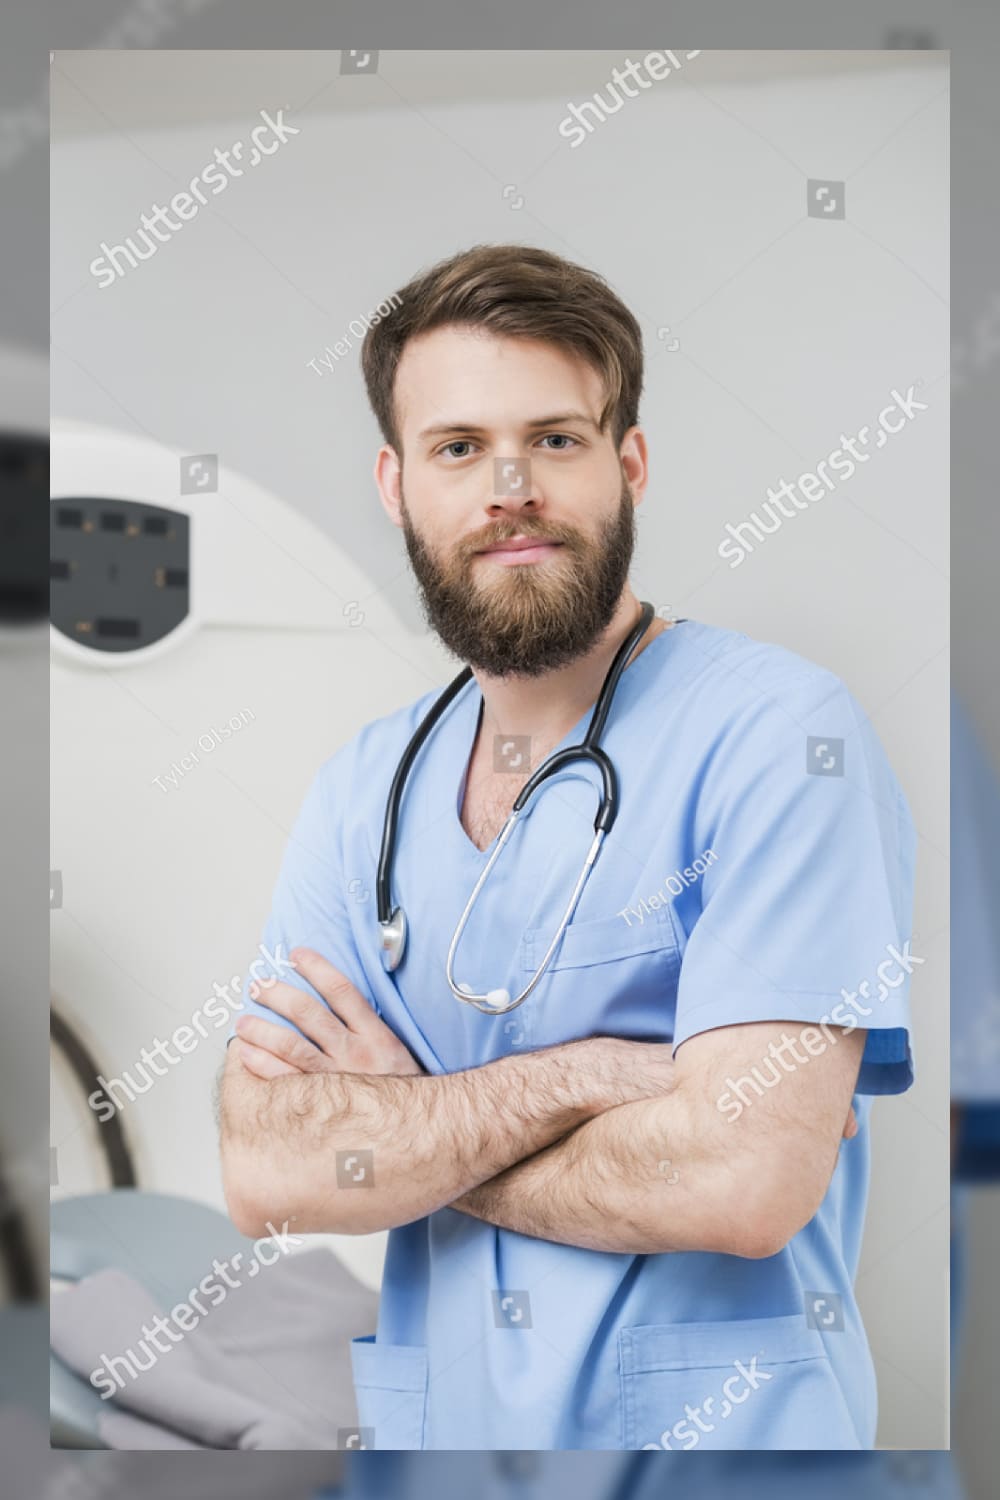 Male doctor standing arms crossed in examination room.